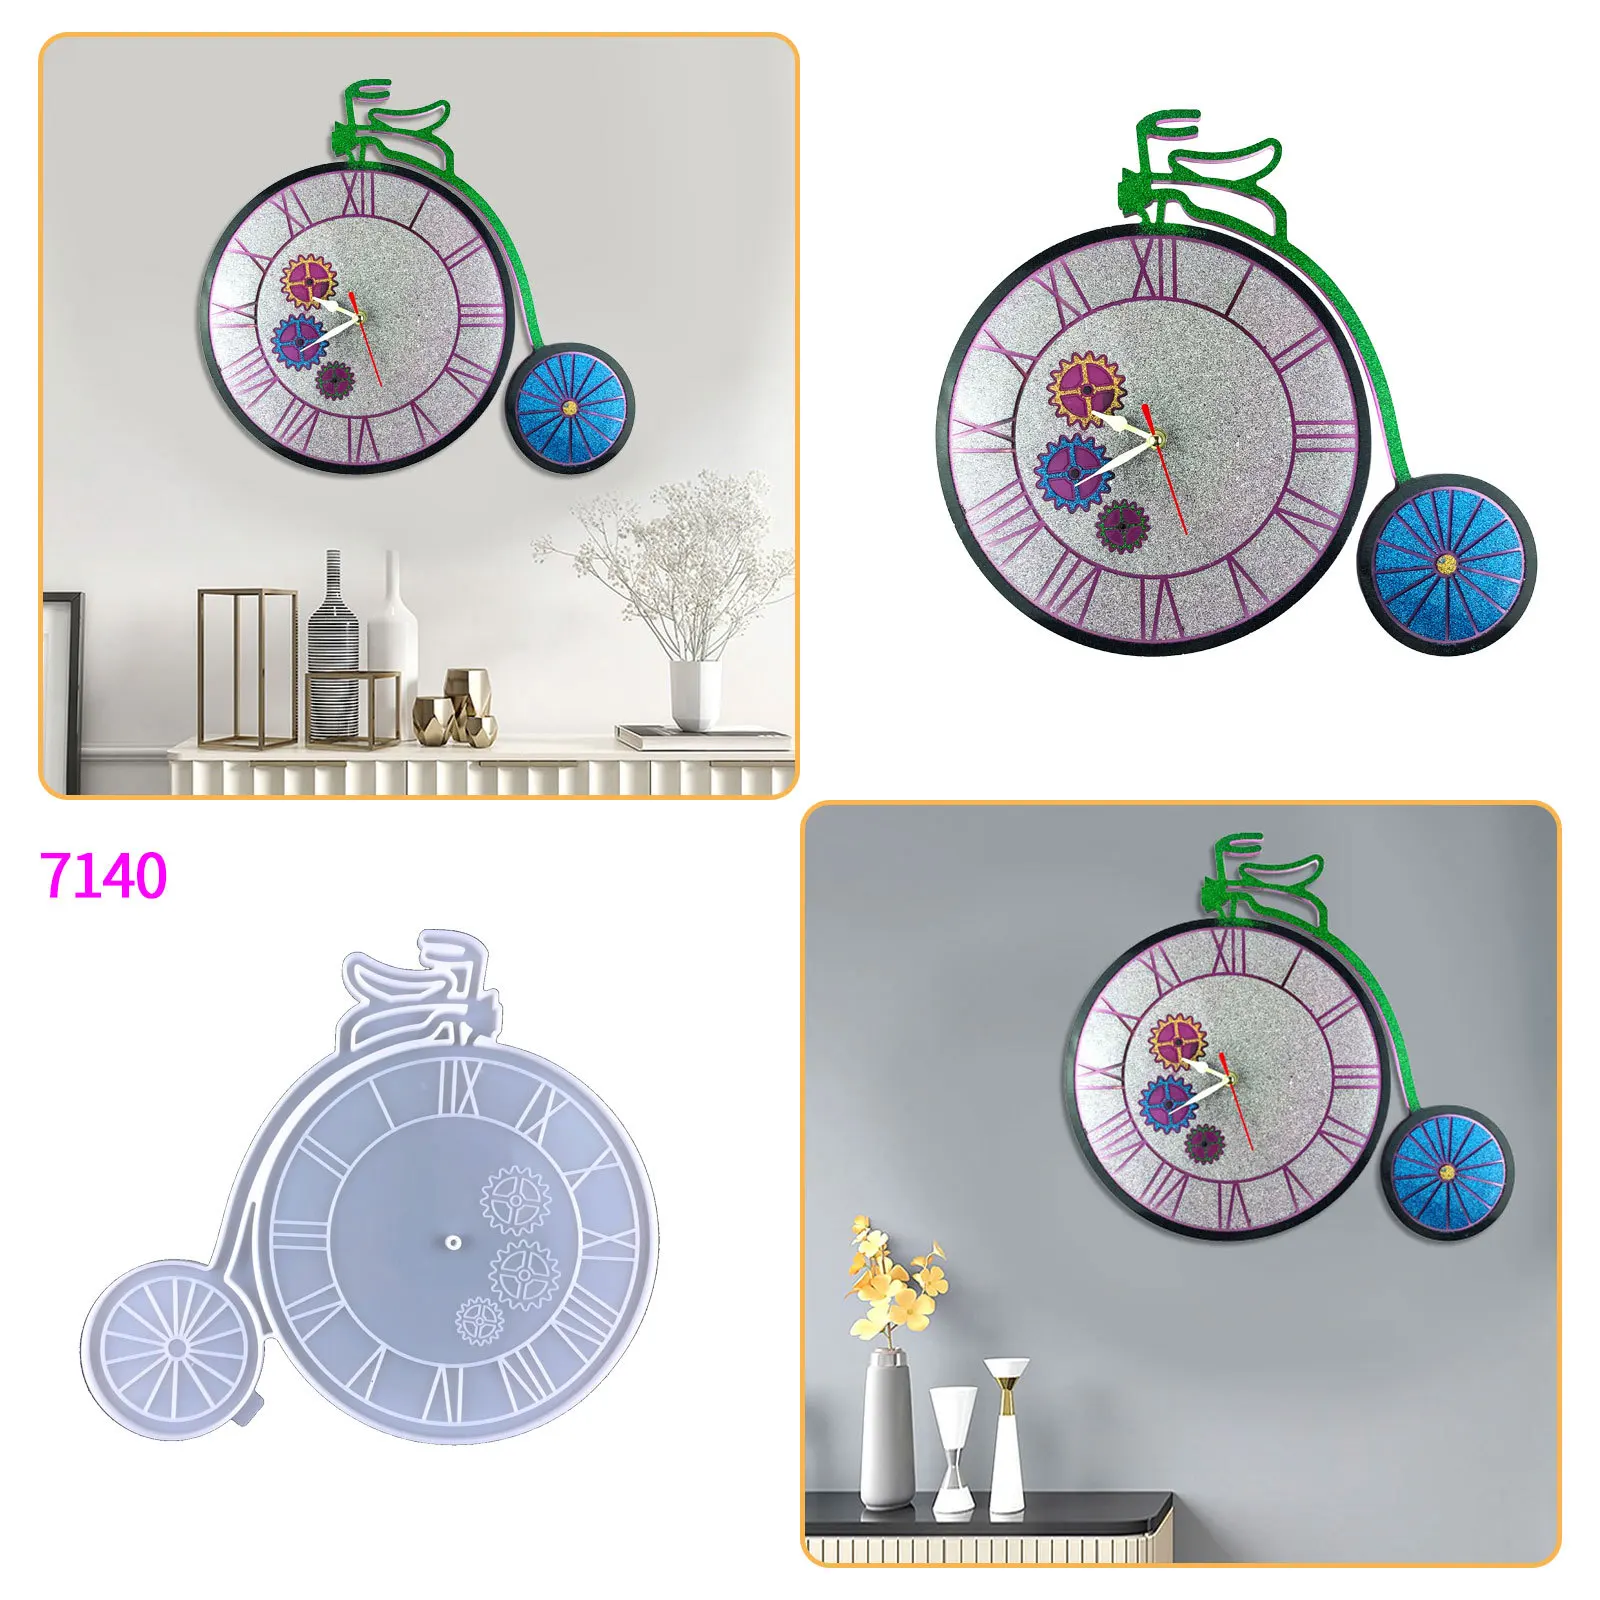 Bicycle Clock Silicone Mold DIY Round Gear Creative Wall Clock Hanging Decoration Mirror Silicone Epoxy Mould For Resin diy crystal silicone mold oversized round clock dial ornament wall hanging home decoration silicone resin mold handmade art mold